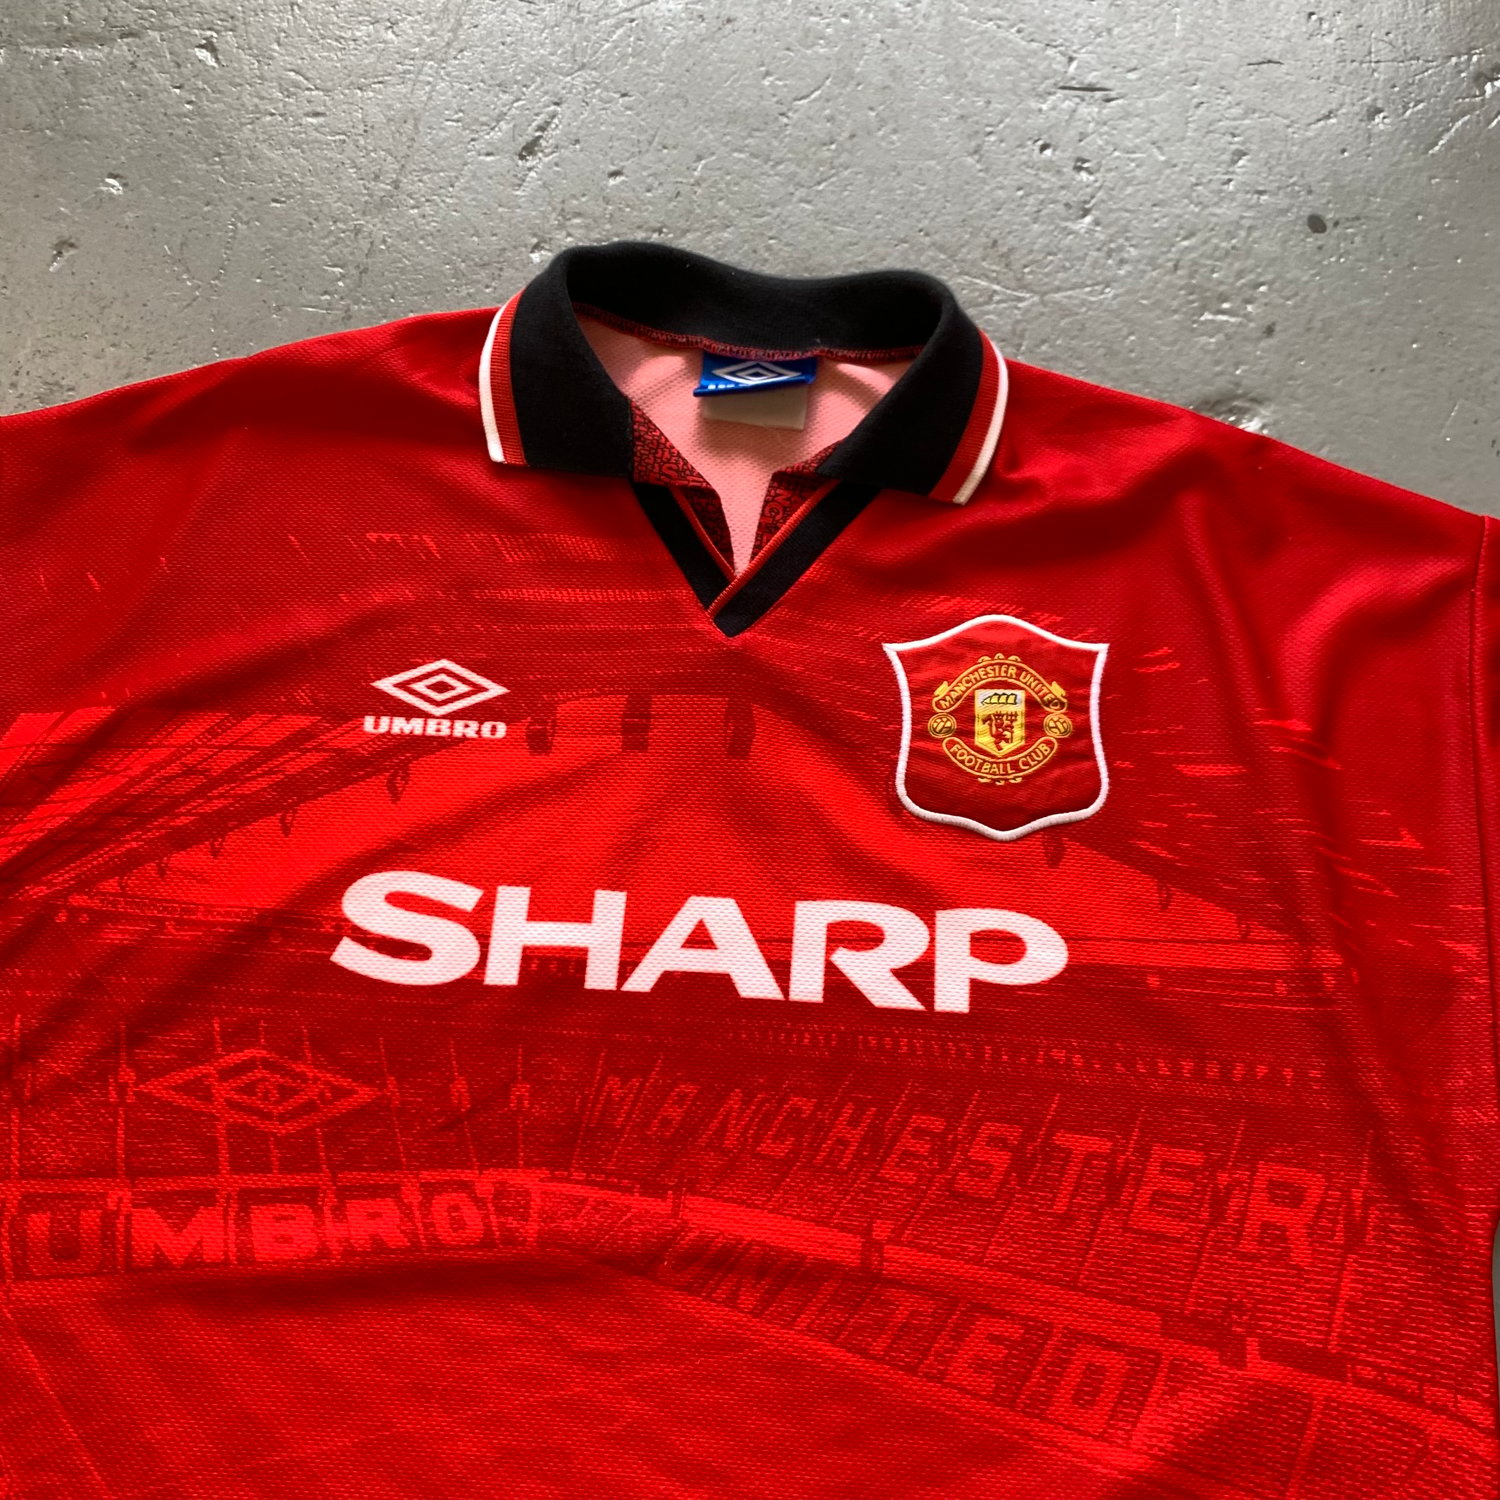 Image of 94/96 Manchester United home shirt size large 